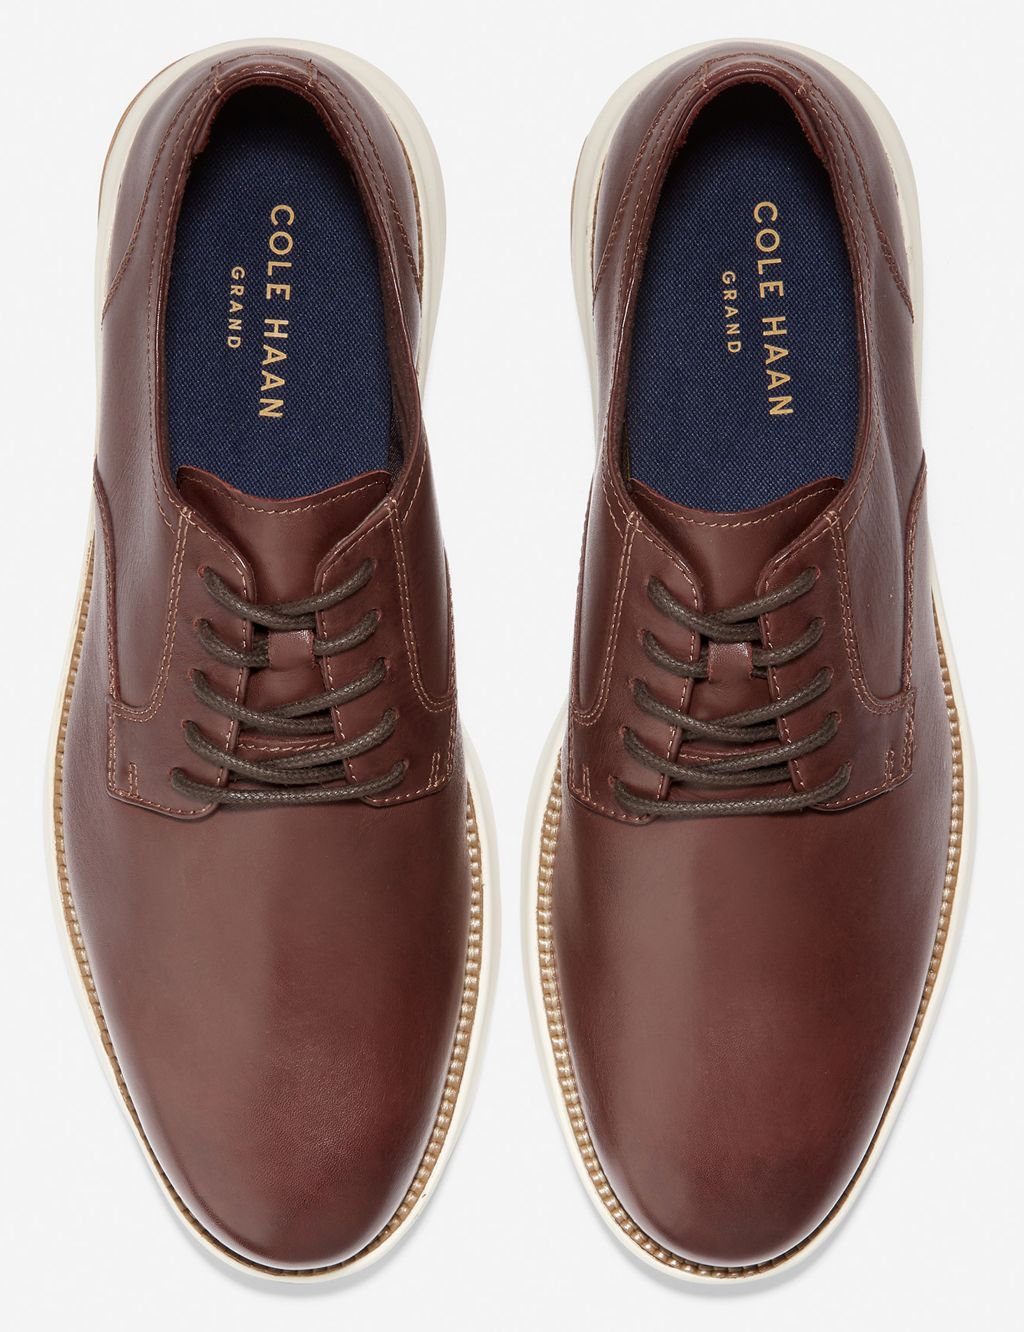 Grand Atlantic Wide Fit Leather Oxford Shoes image 3